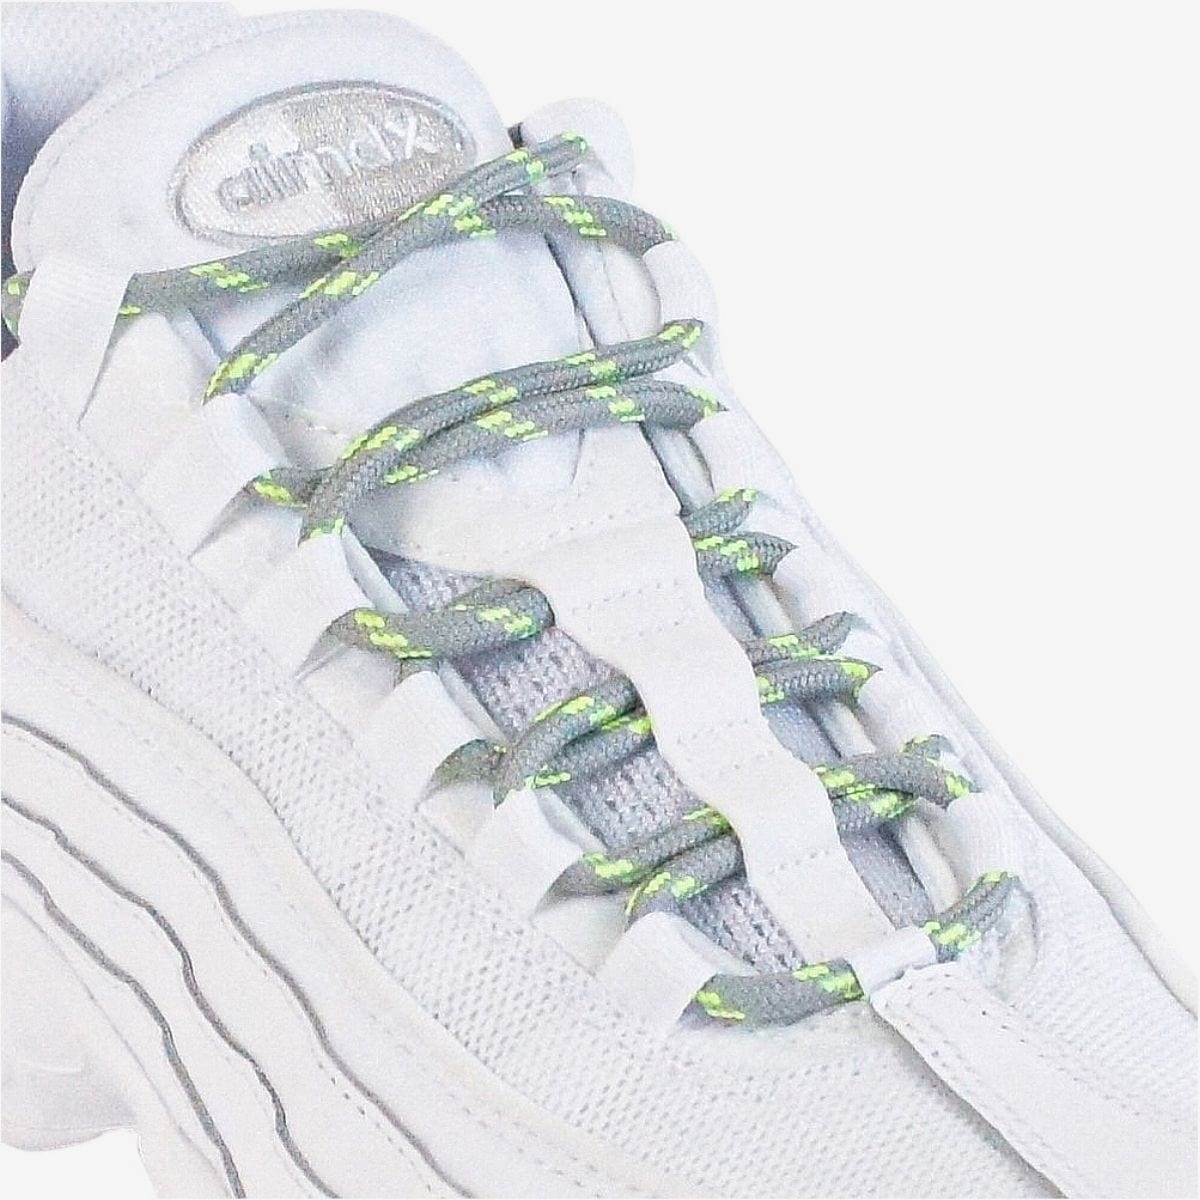 walking-shoe-laces-online-in-australia-colour-light-grey-and-green